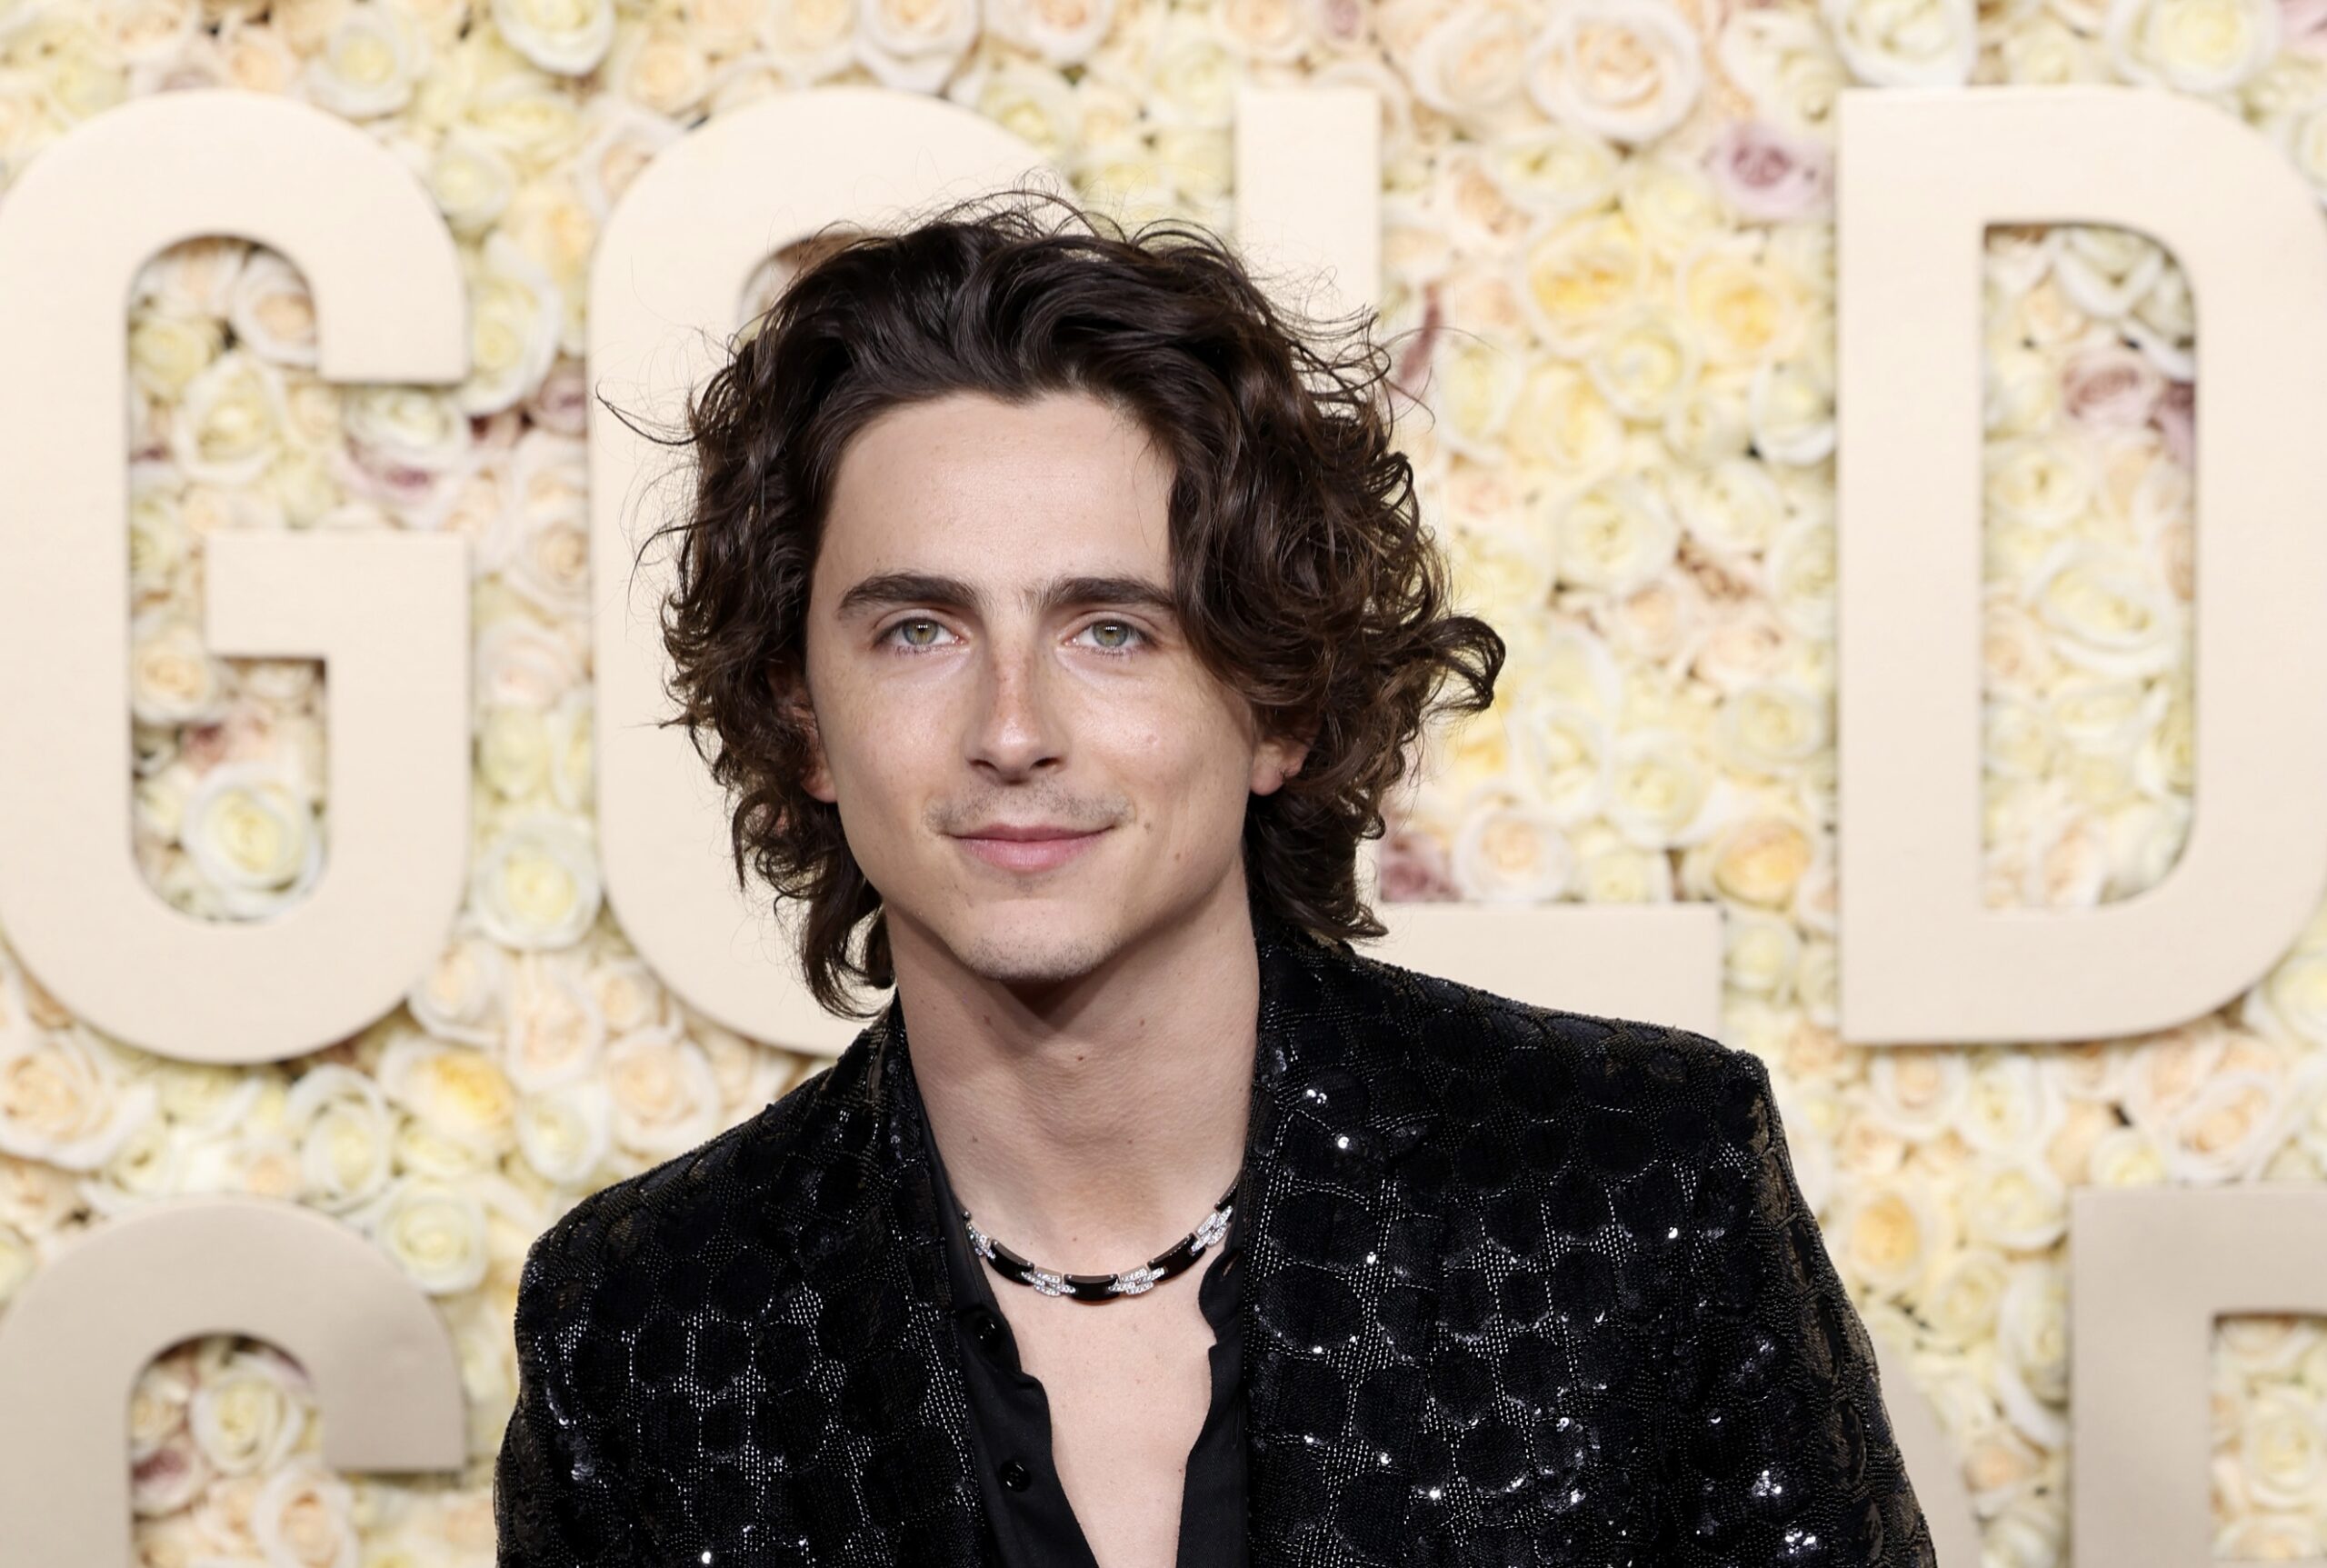 In a close-up at the Golden Globe Awards, Timothée Chalamet exudes elegance with a detailed view of his black sequined blazer, its pattern intricate and catching the light. His open-collar black shirt frames a statement silver necklace, and his poised expression reflects his status as a fashion-forward figure in the industry.